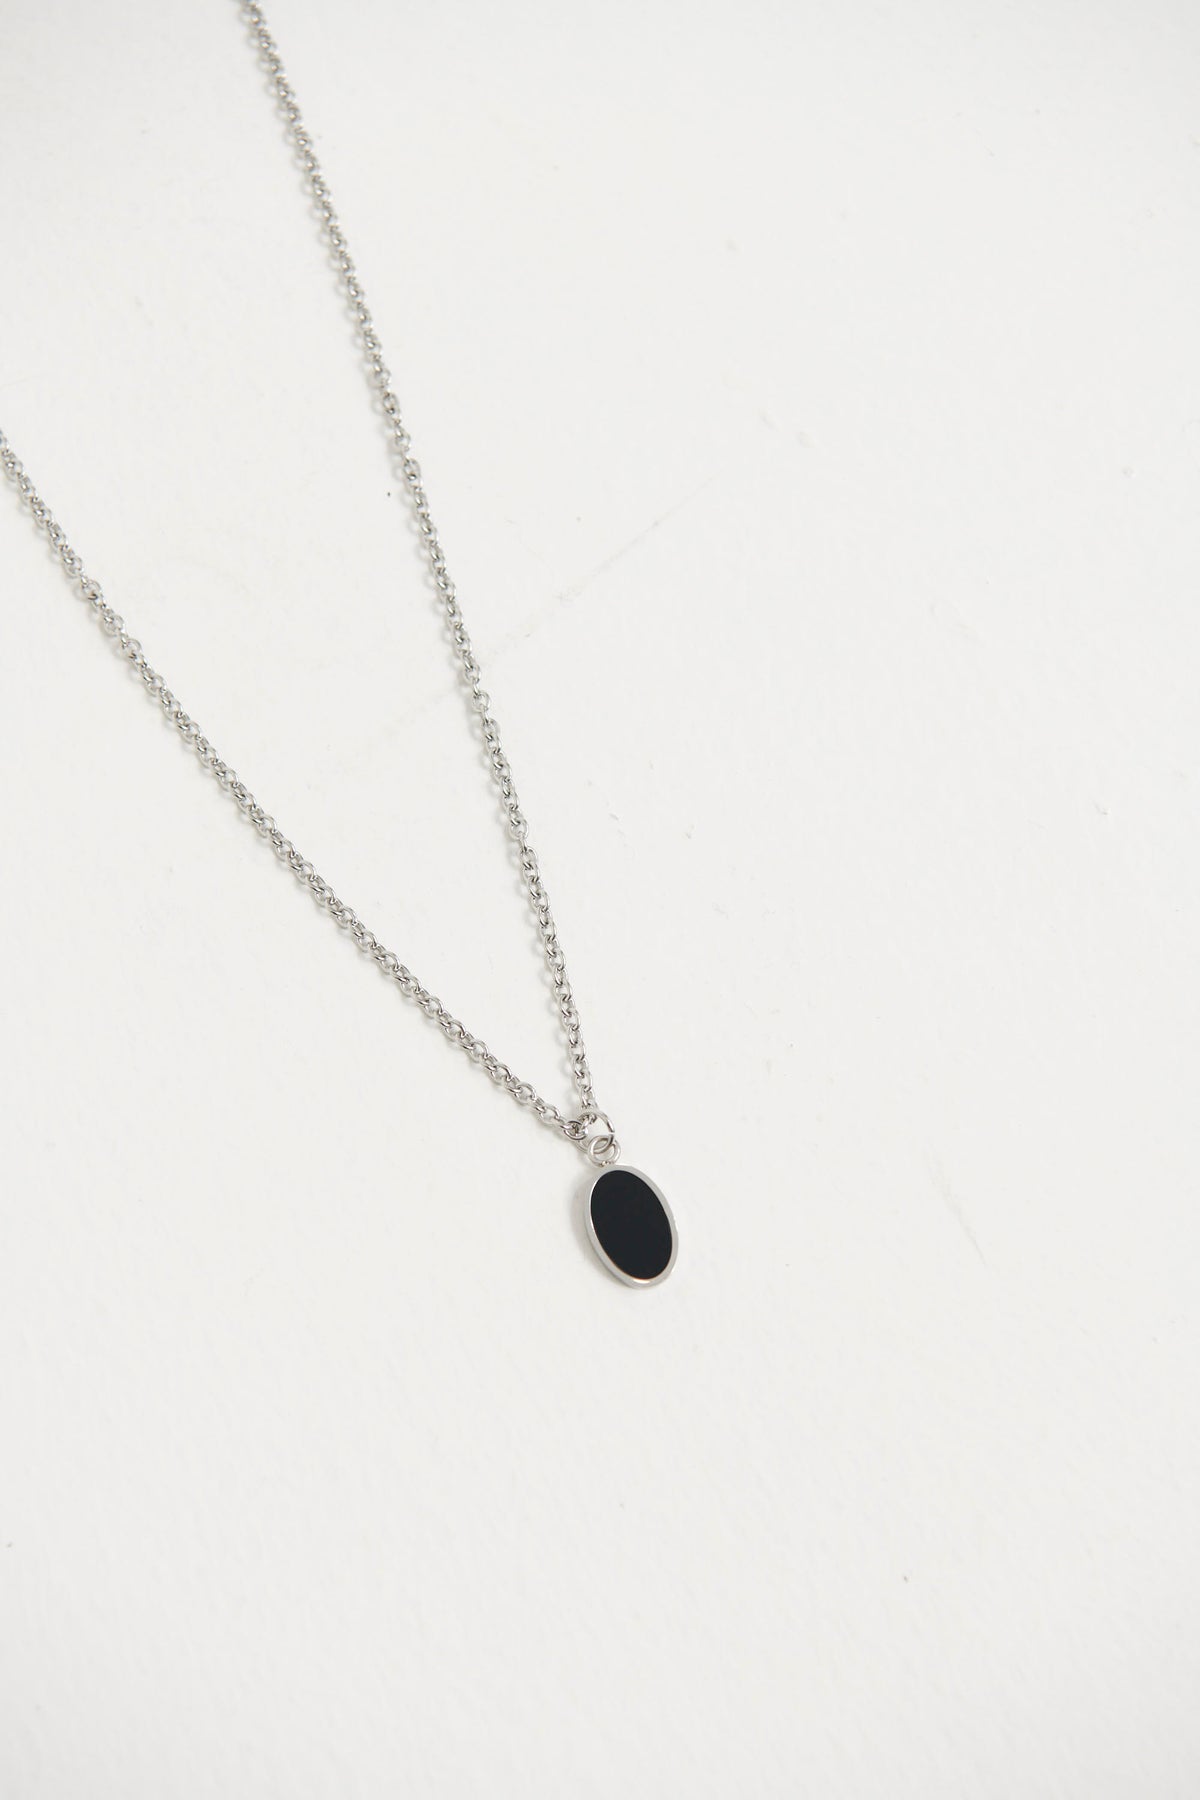 NTH Oval Pendant Necklace Silver